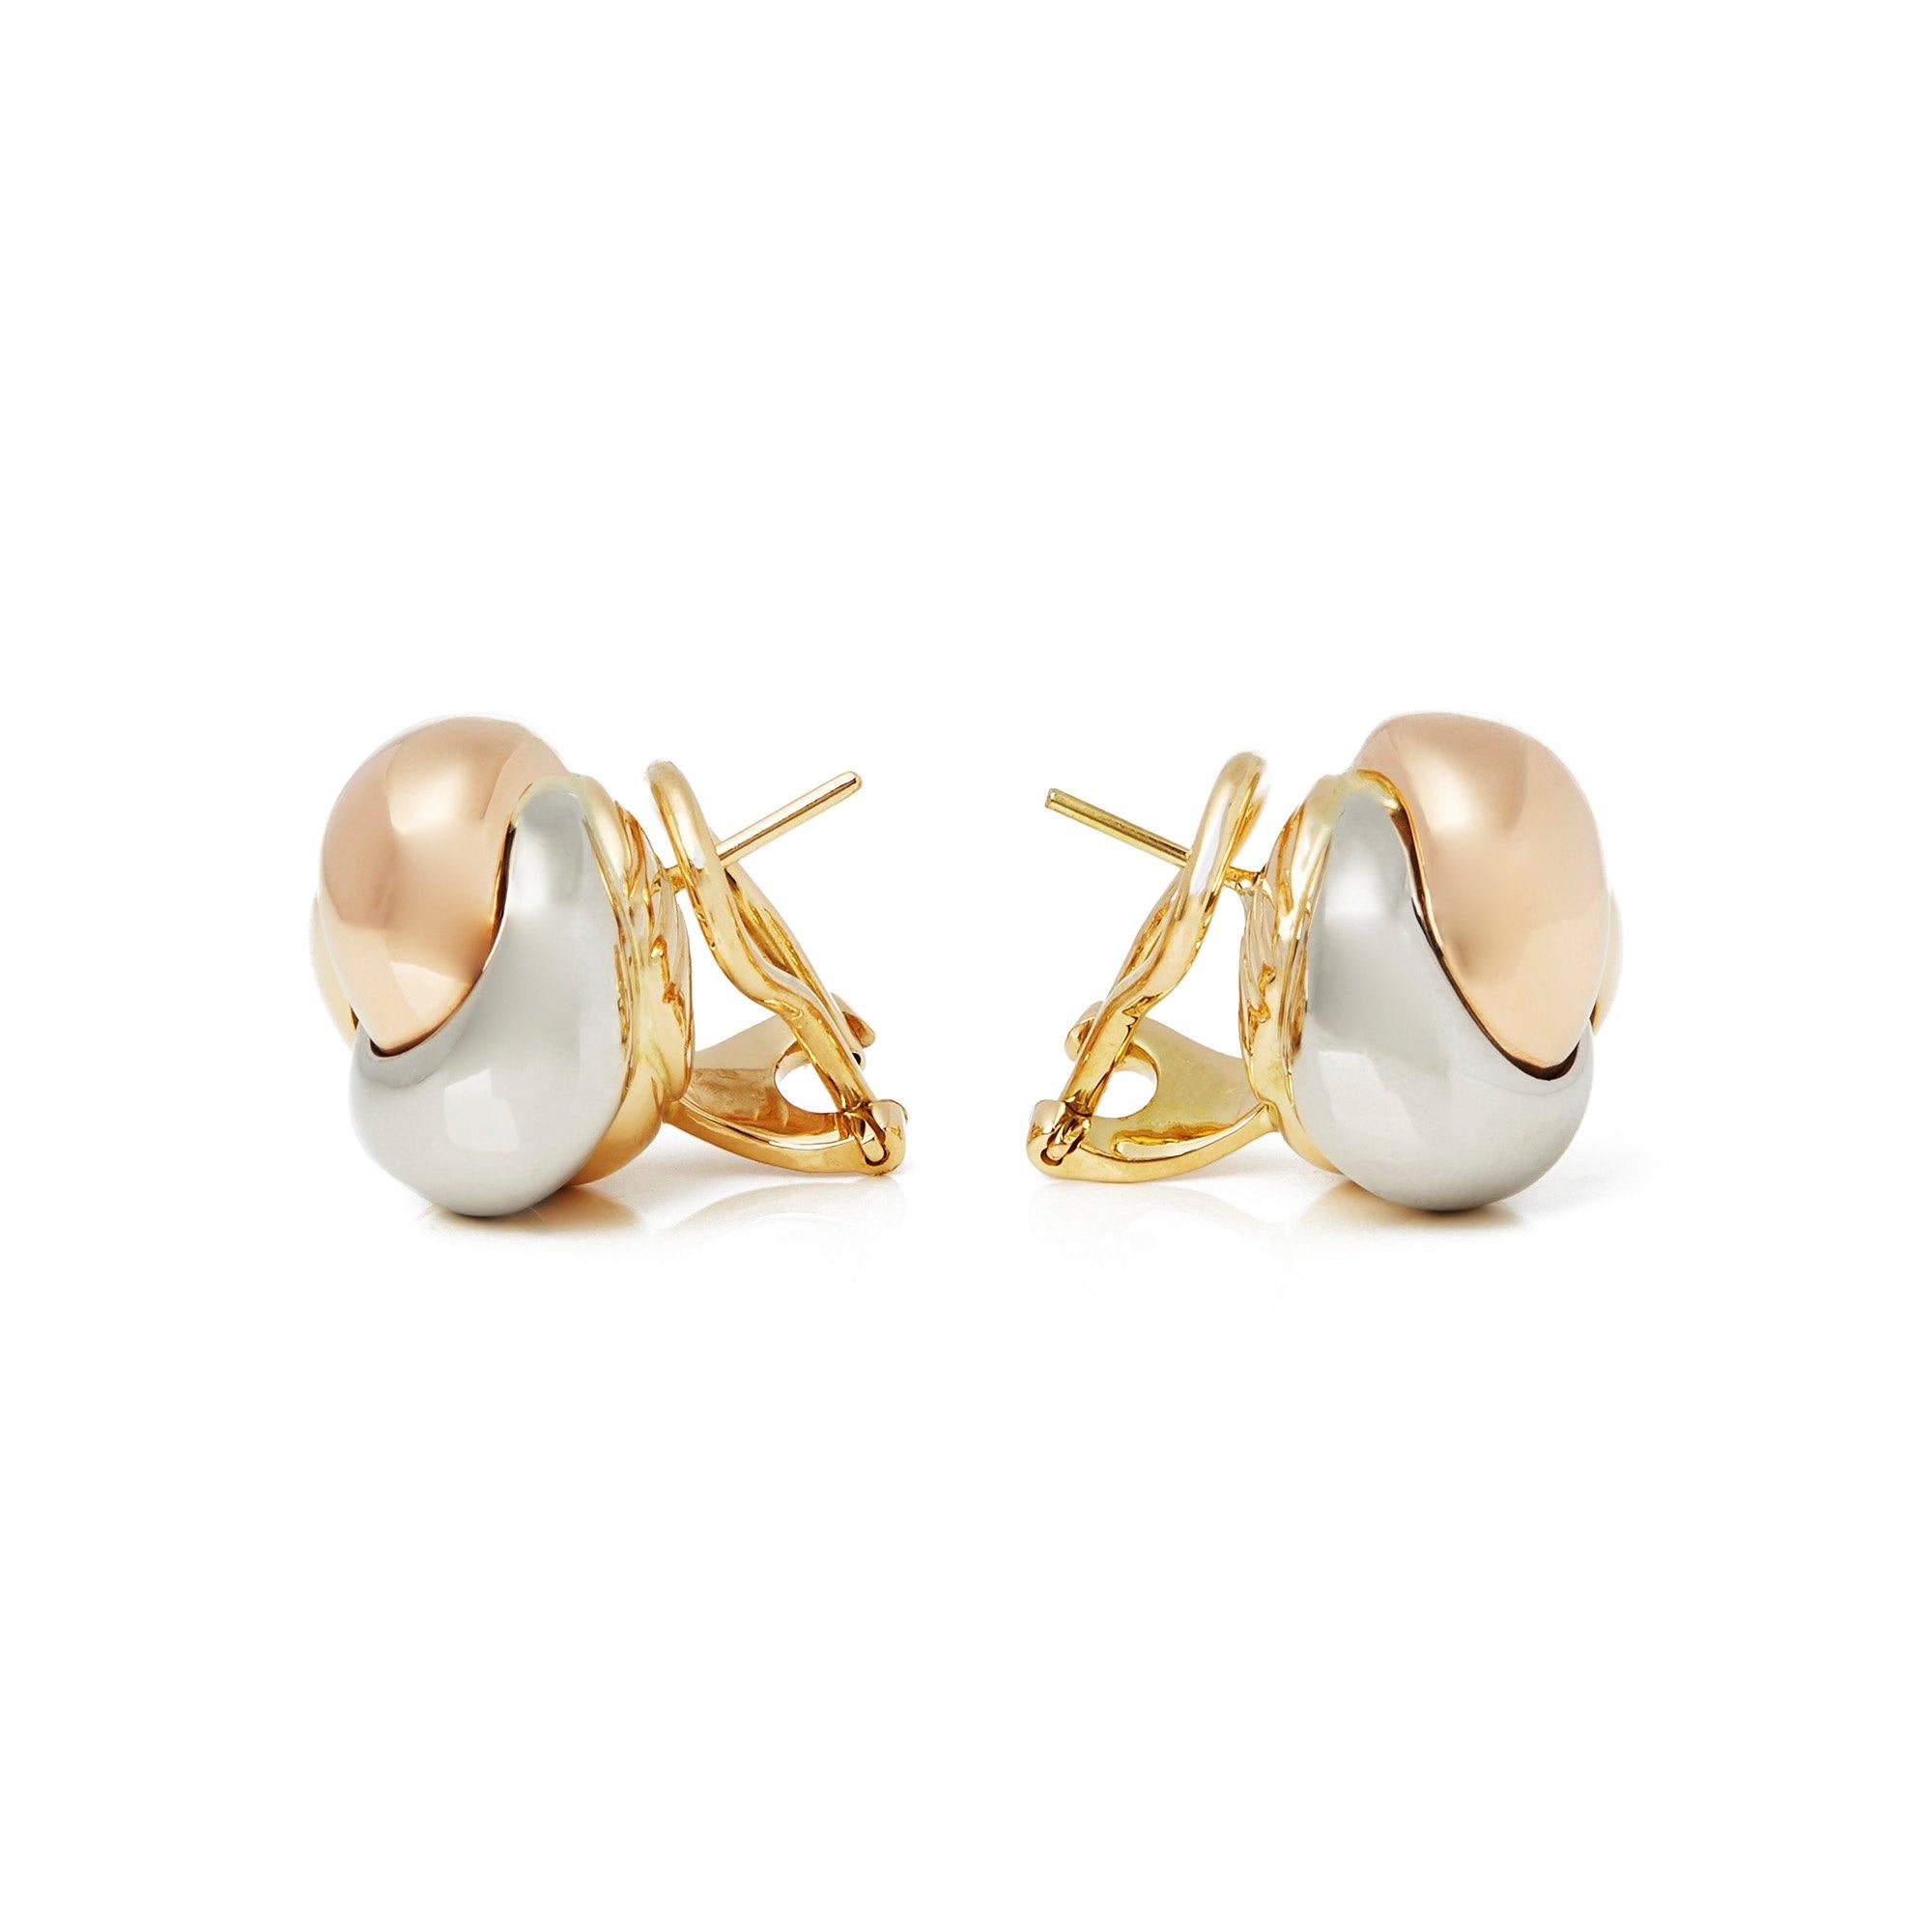 These Earrings by Cartier are from their Trinity Collection and feature Three Sections in 18k Yellow, White and Rose Gold. With Omega fittings. Complete with Xupes Presentation Box. Our Xupes reference is COMJ227 should you need to quote this.